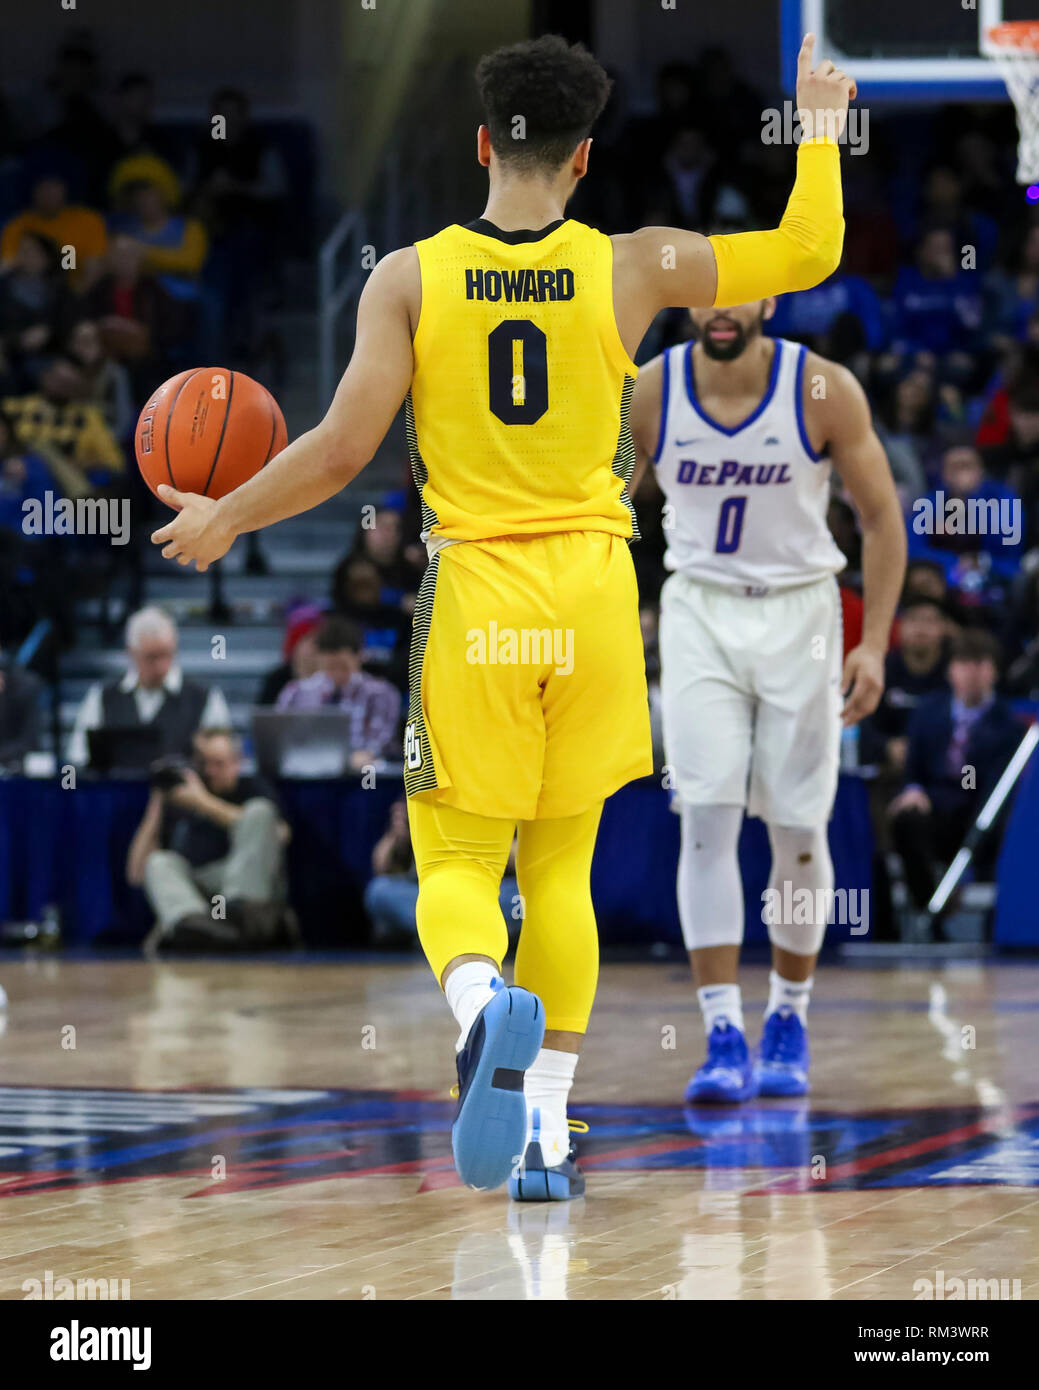 Chicago, USA. 12th Feb 2019. Marquette Golden Eagles guard Markus Howard (0) calls out a play while bringing the ball past halfcourt during NCAA basketball game between the Marquette Golden Eagles and the DePaul University Blue Demons at Wintrust Arena in Chicago IL. Gary E. Duncan Sr/CSM Credit: Cal Sport Media/Alamy Live News Stock Photo